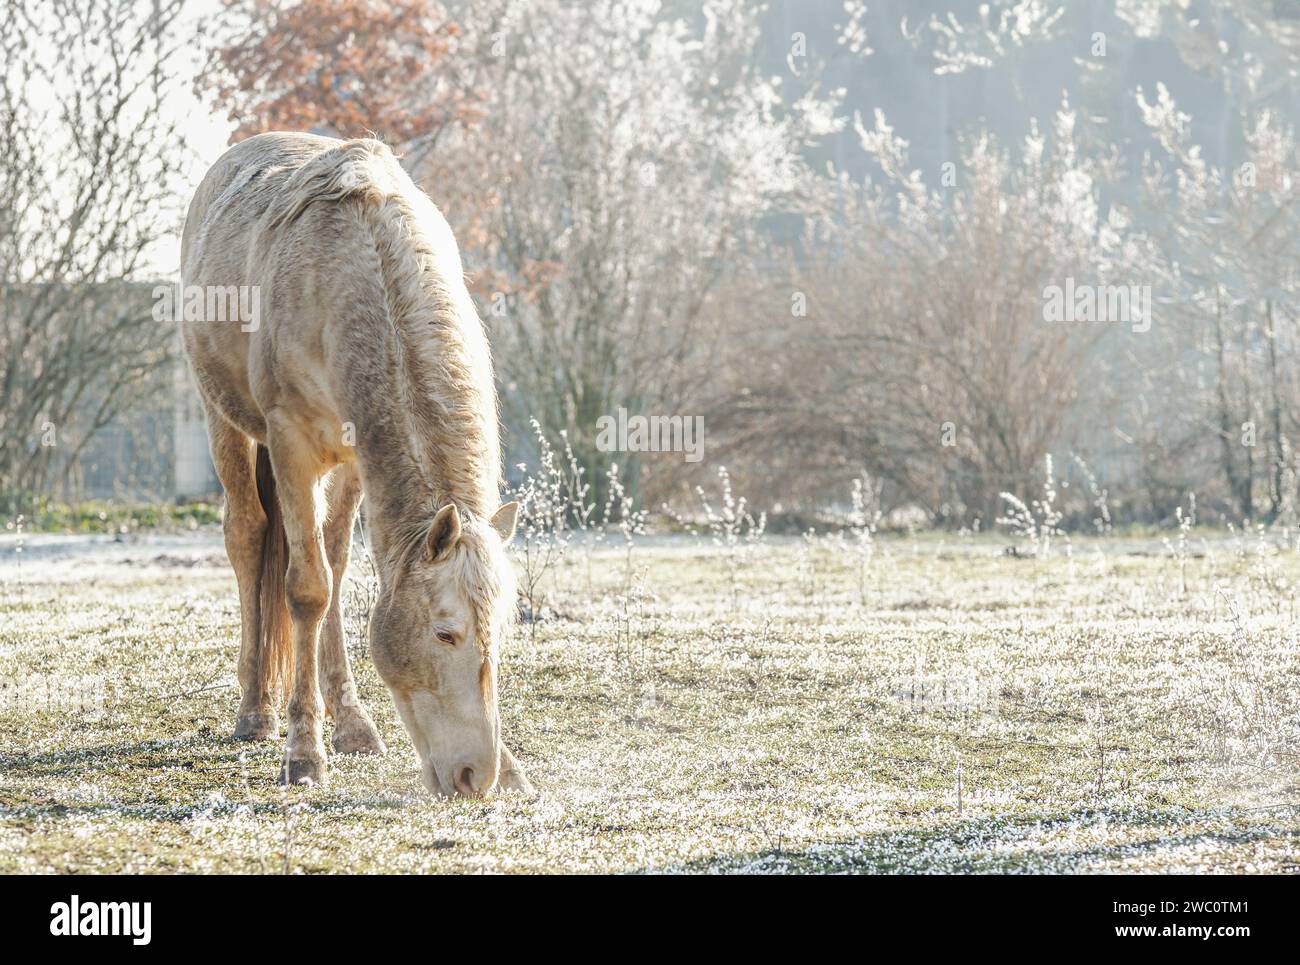 Palomino horse grazes on the grass with frost, outdoor Stock Photo